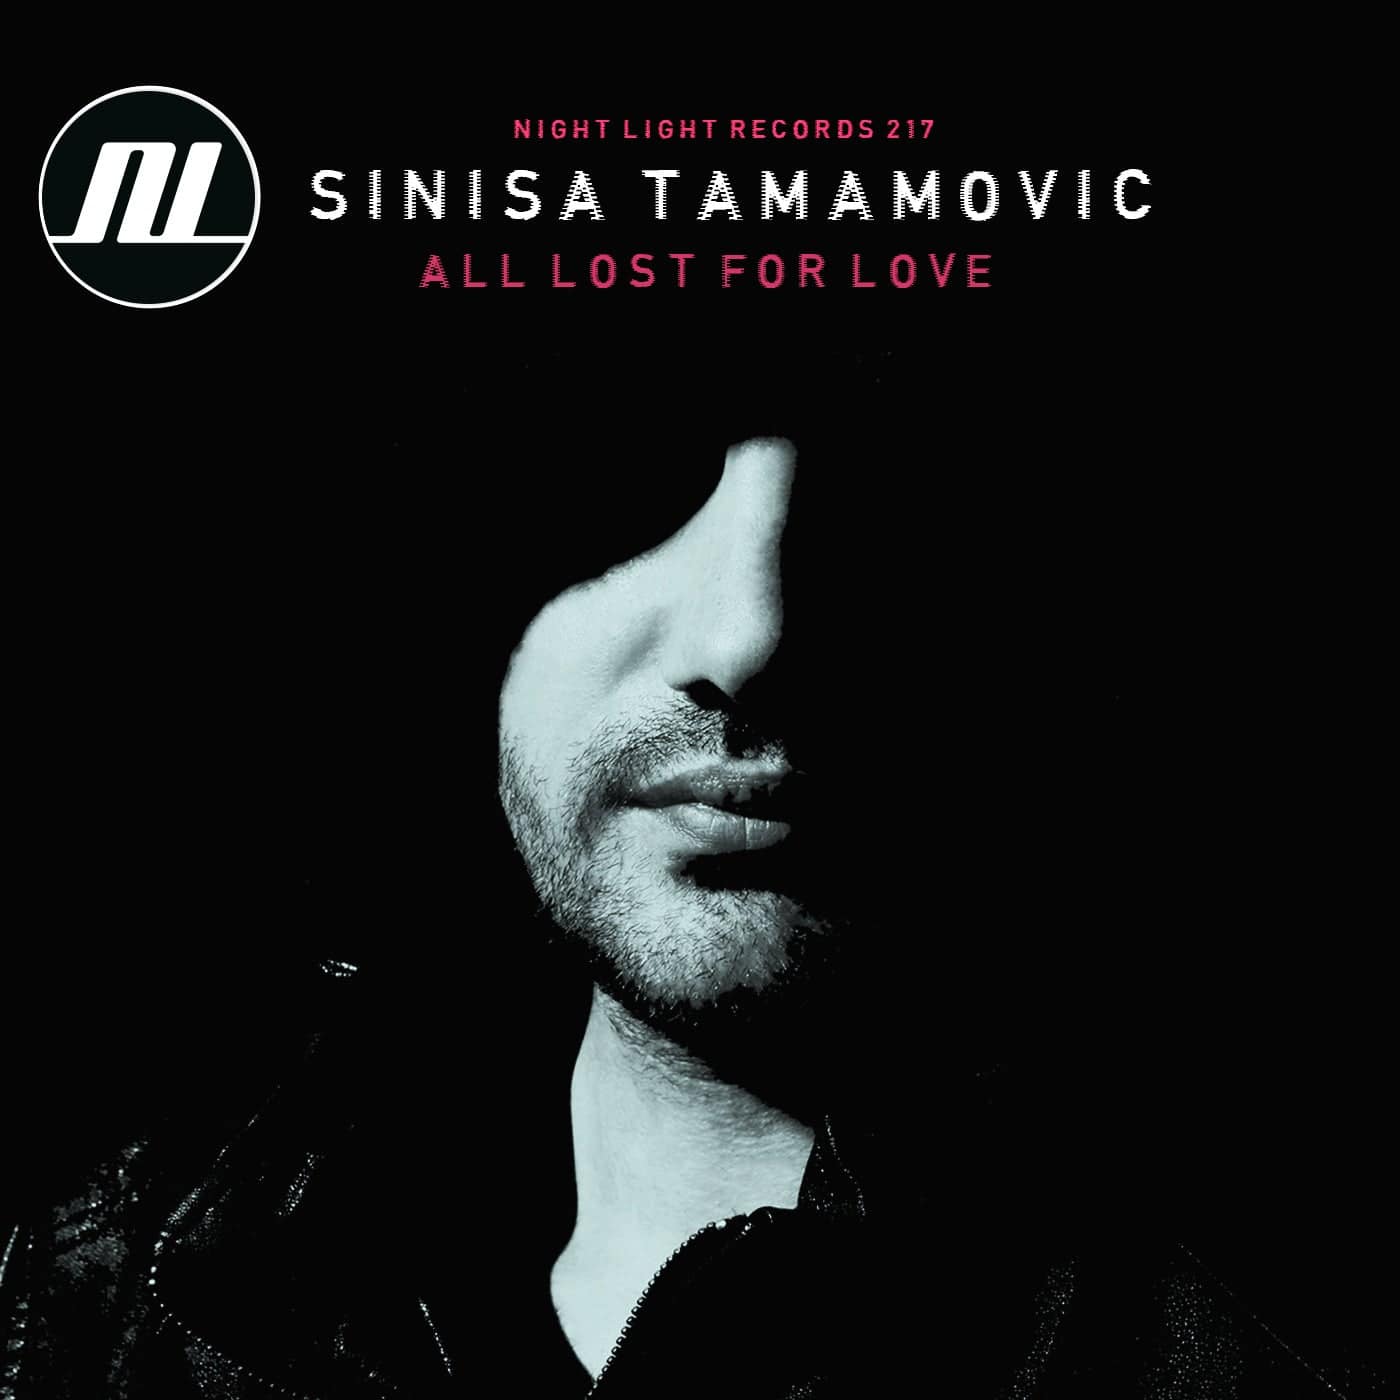 Download Sinisa Tamamovic - All Lost For Love EP on Electrobuzz